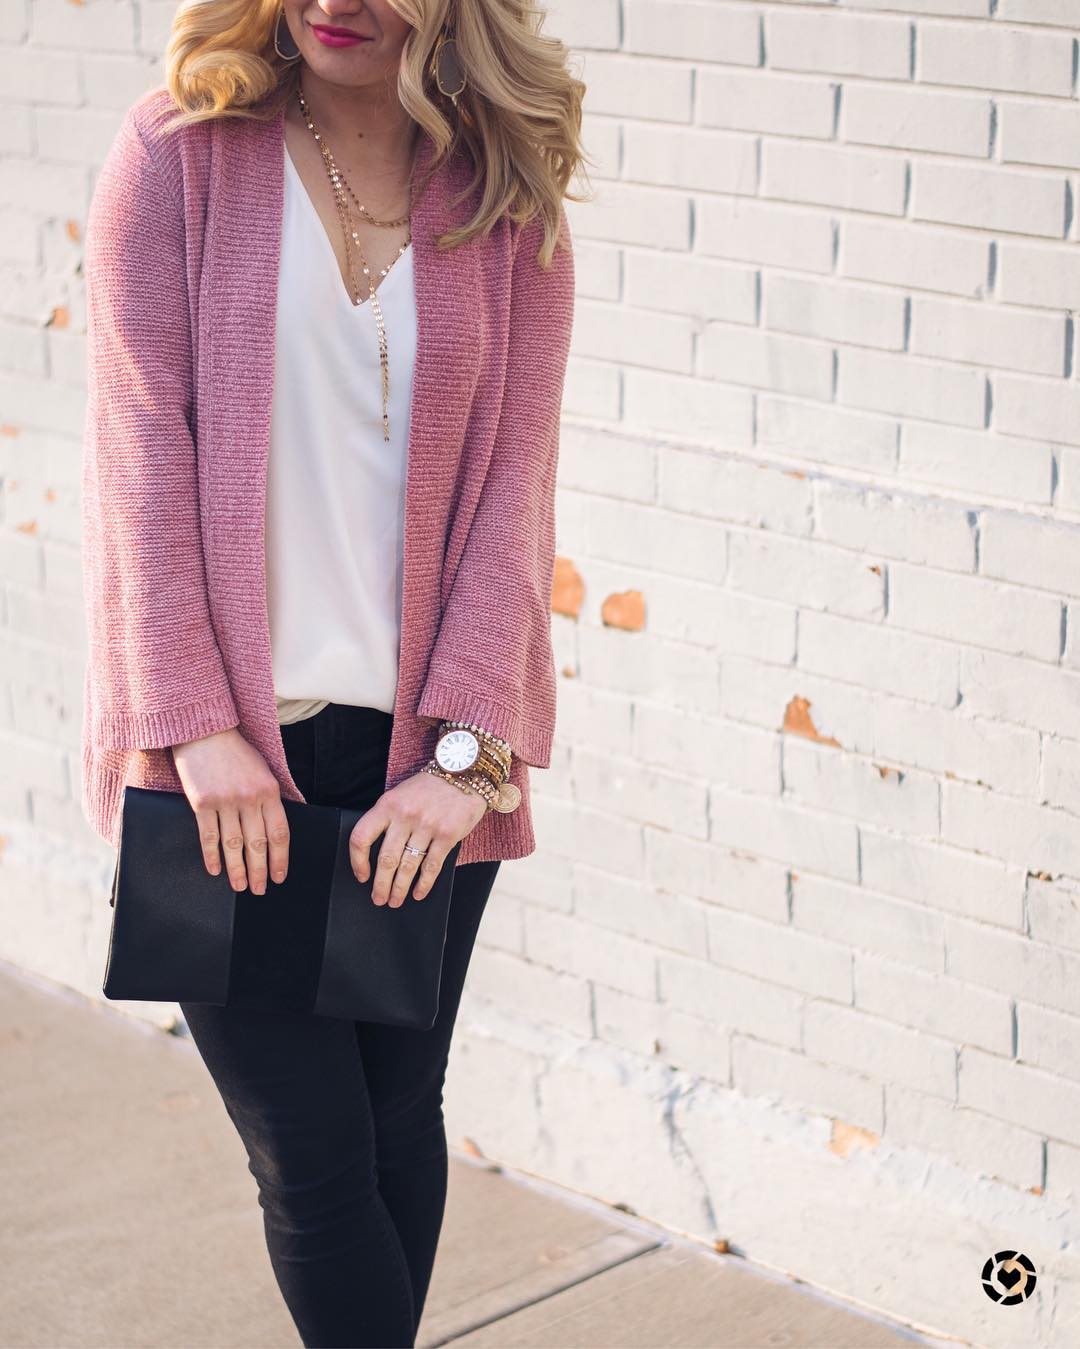 Gorgeous Pink Open Cardigan With White Top And Black Denim Jeans